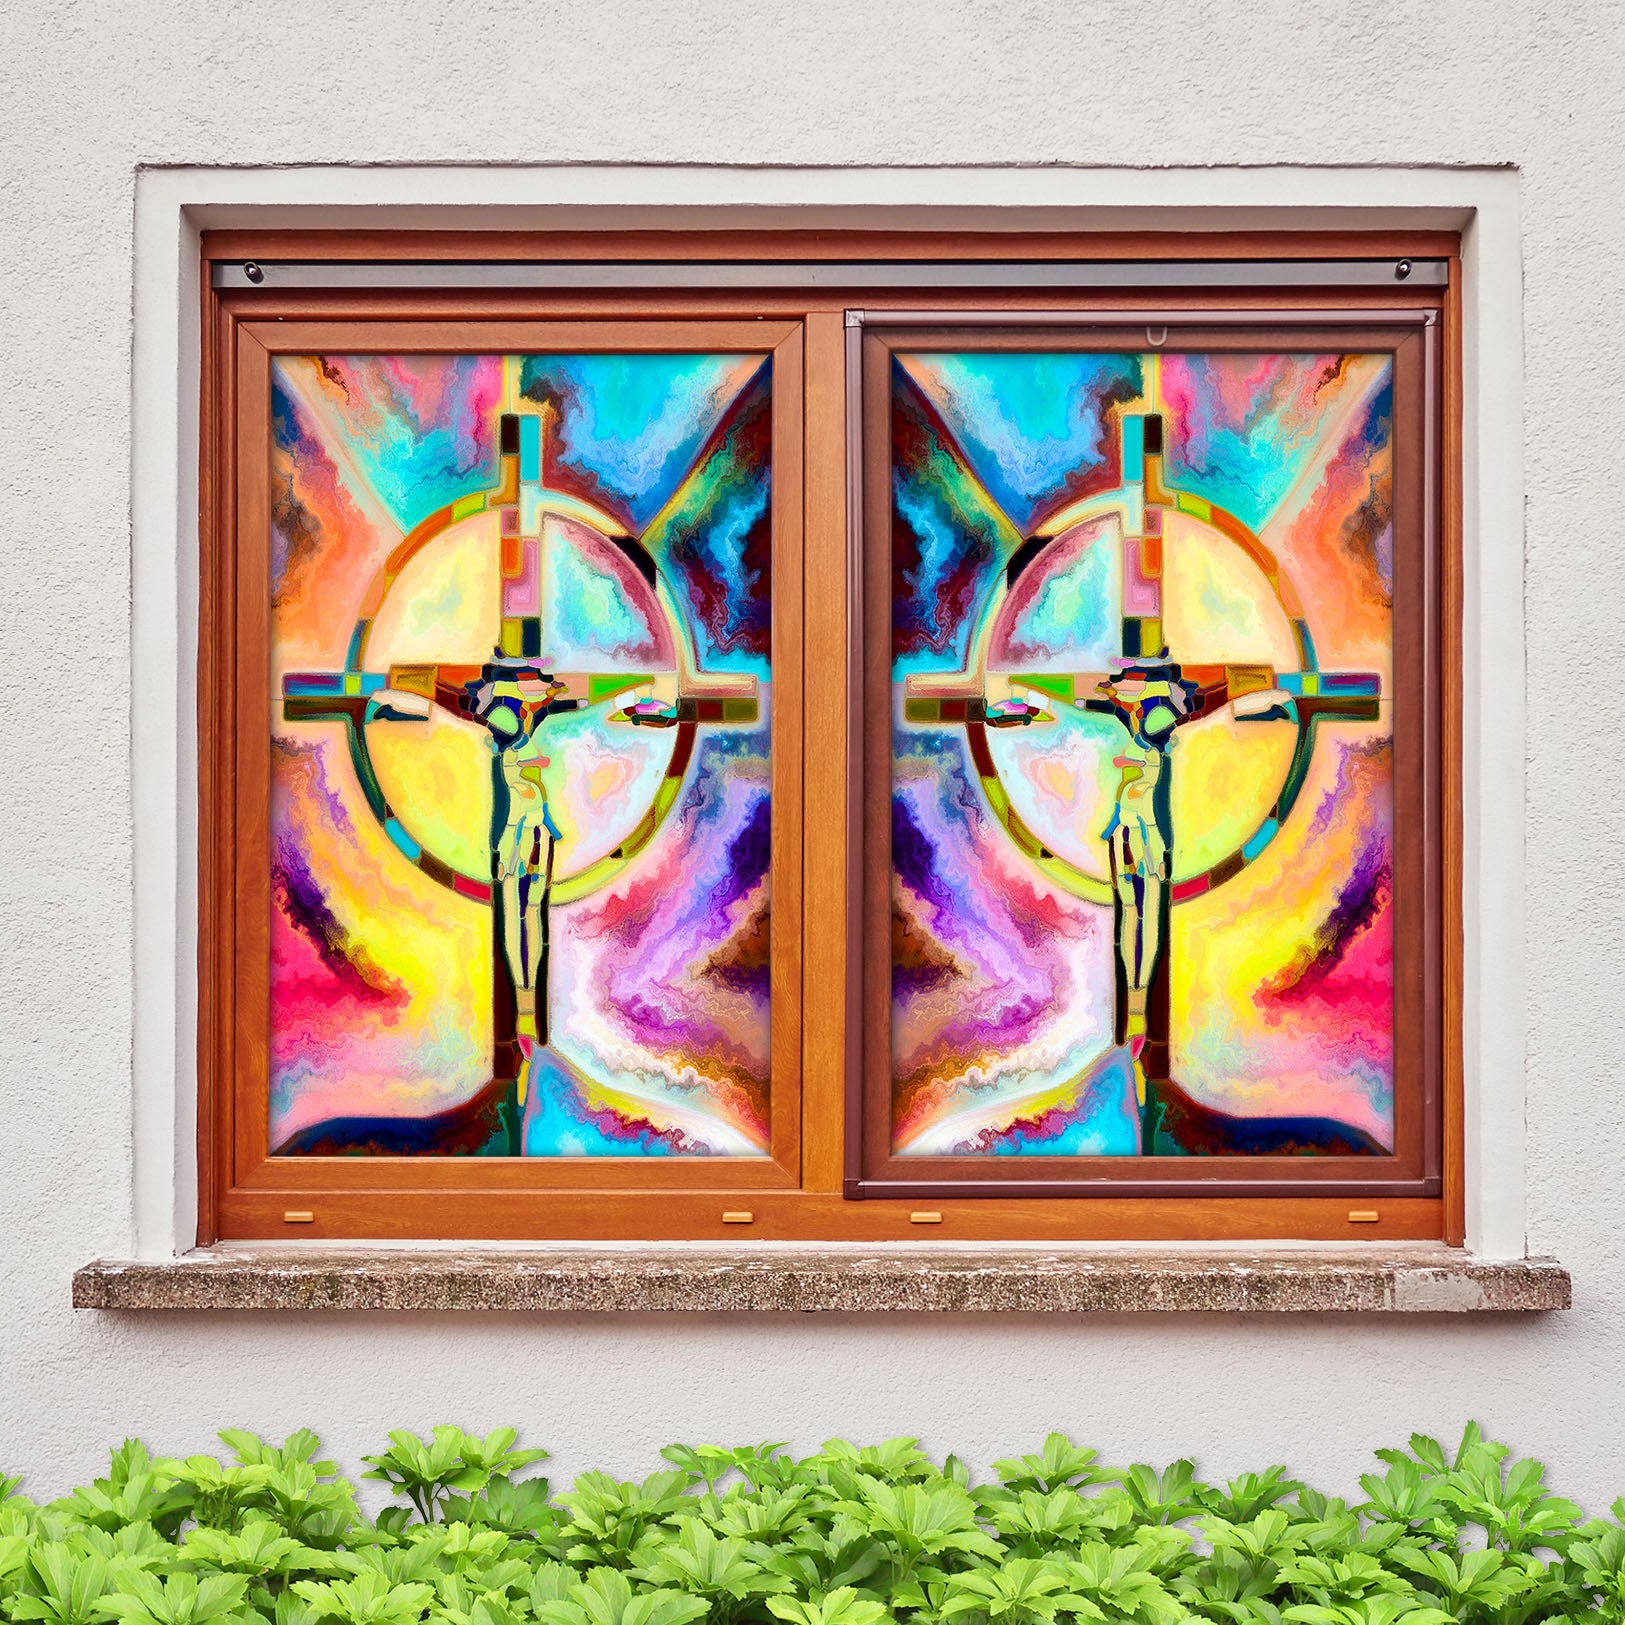 3D Golden Christianity 248 Window Film Print Sticker Cling Stained Glass UV Block